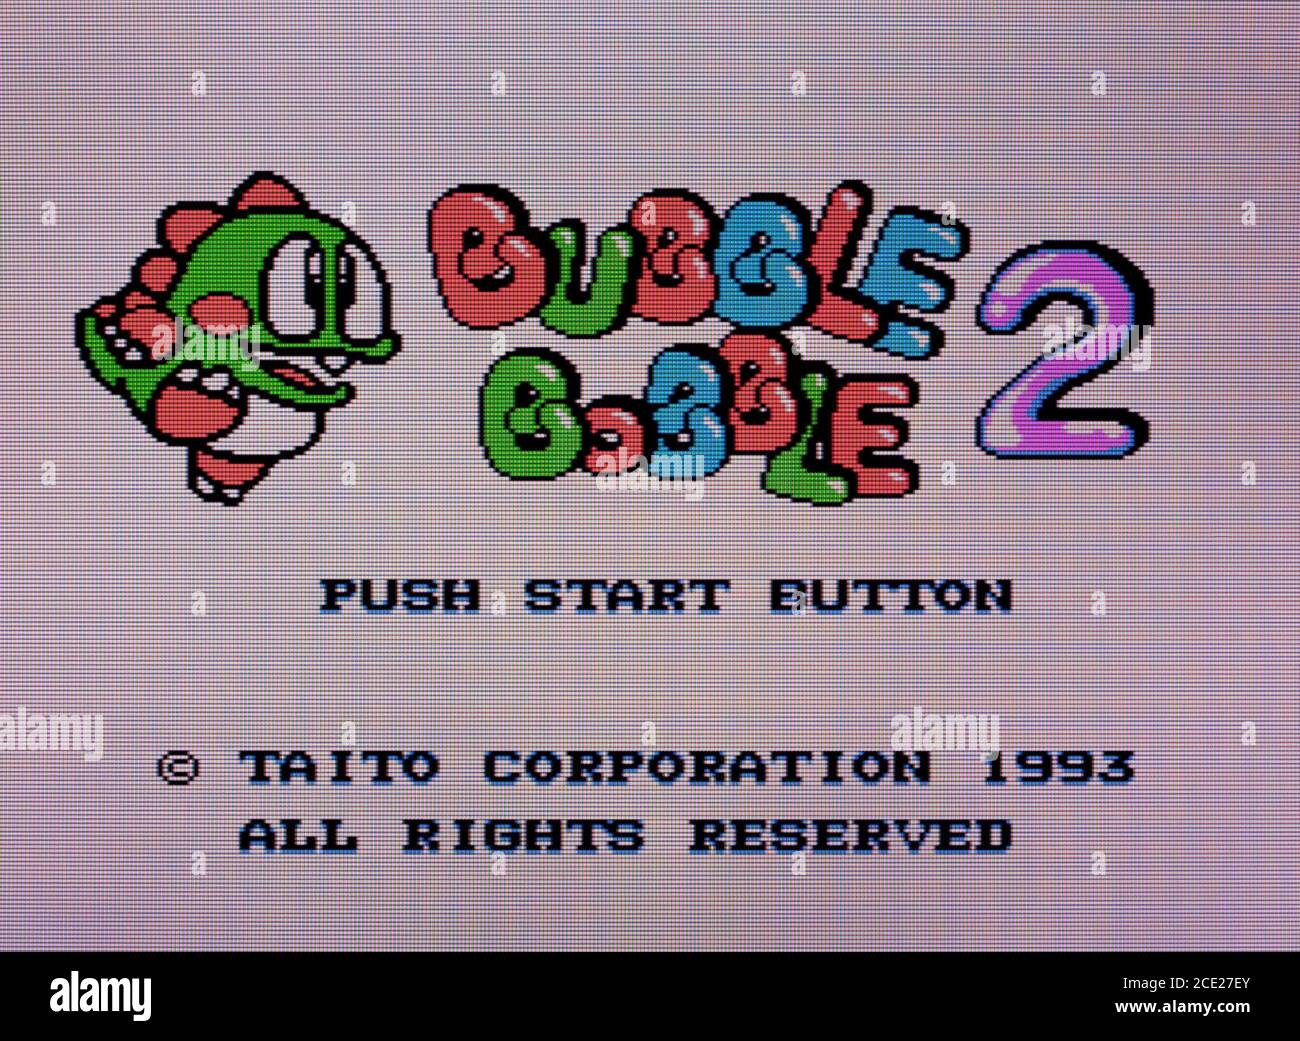 Bubble Bobble 2 - Nintendo Entertainment System - NES Videogame - Editorial  use only Stock Photo - Alamy